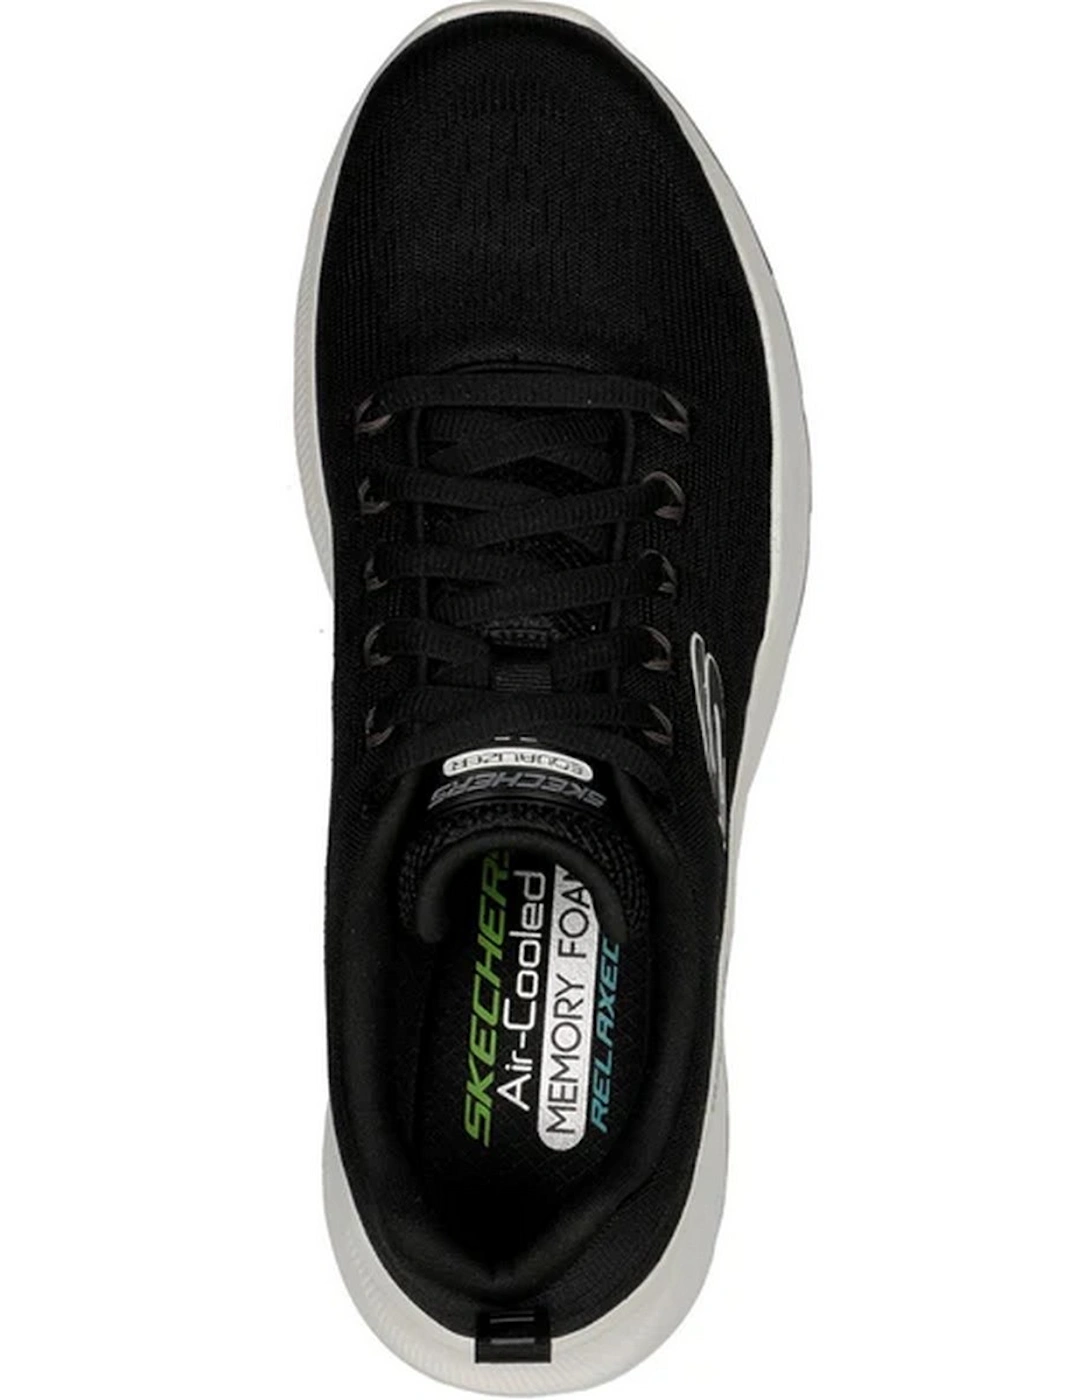 Mens Equalizer 5.0 Trainers